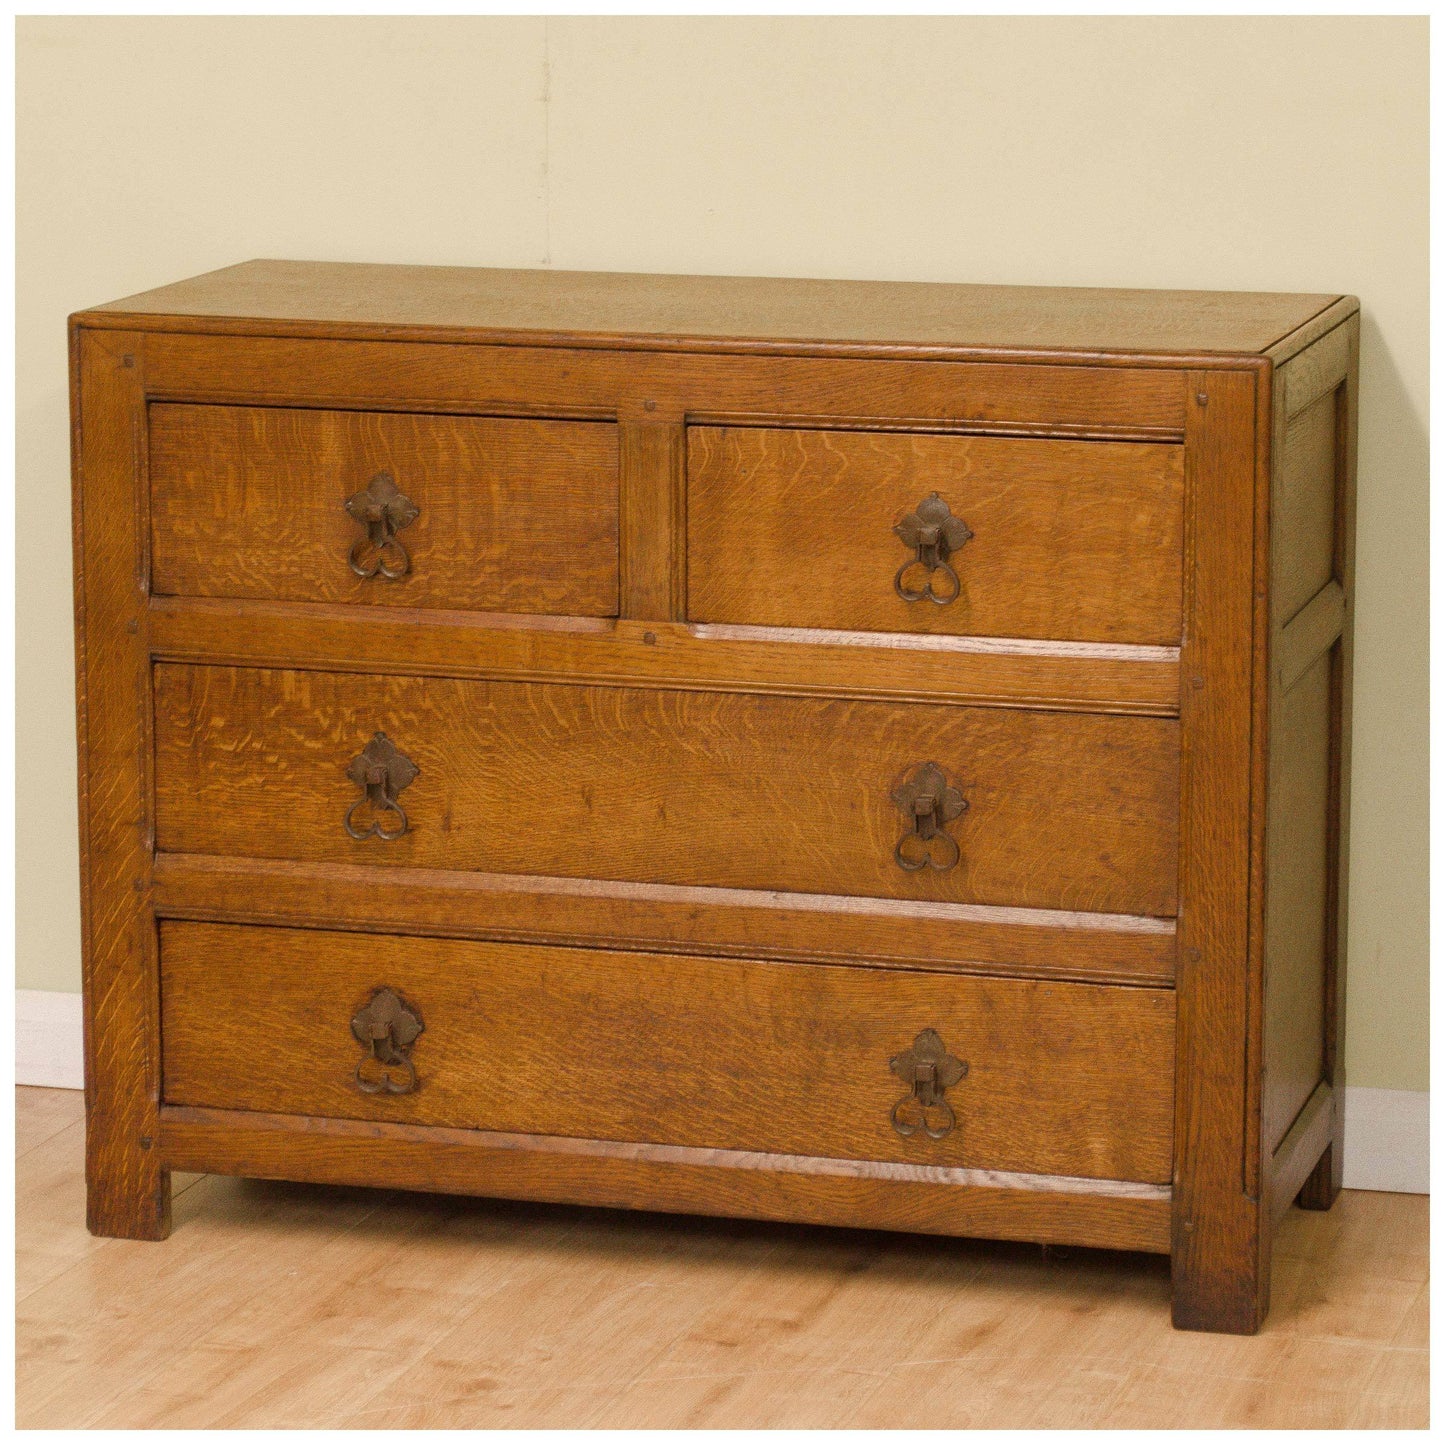 Liberty & Co Arts and Crafts Oak Chest of Drawers 1924